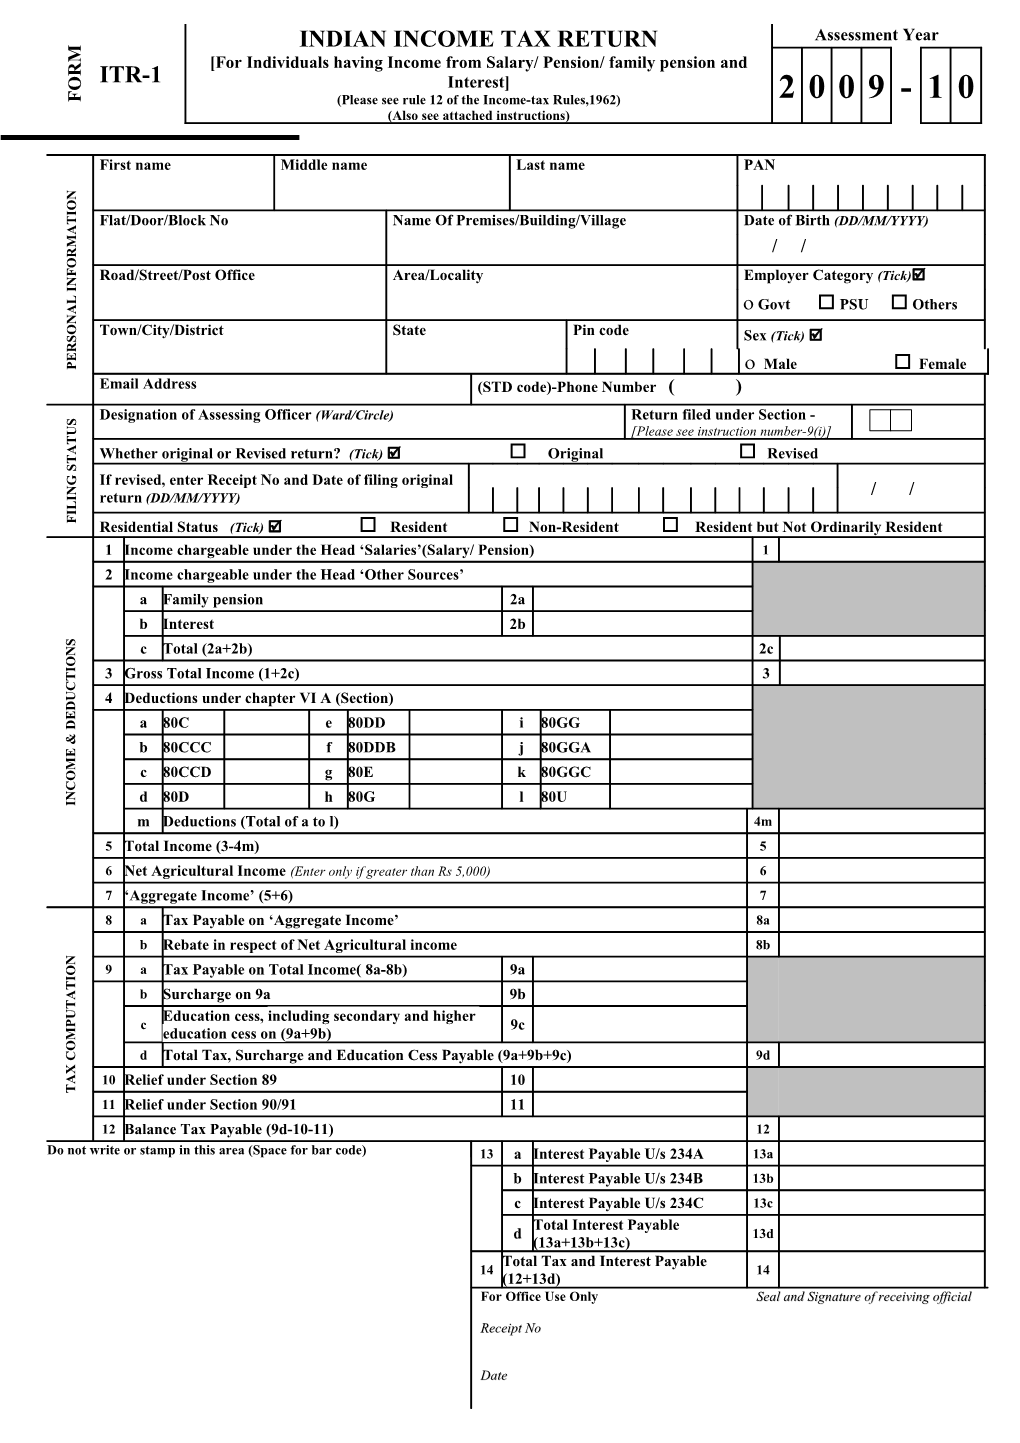 Instructions for Filling out FORM ITR-1